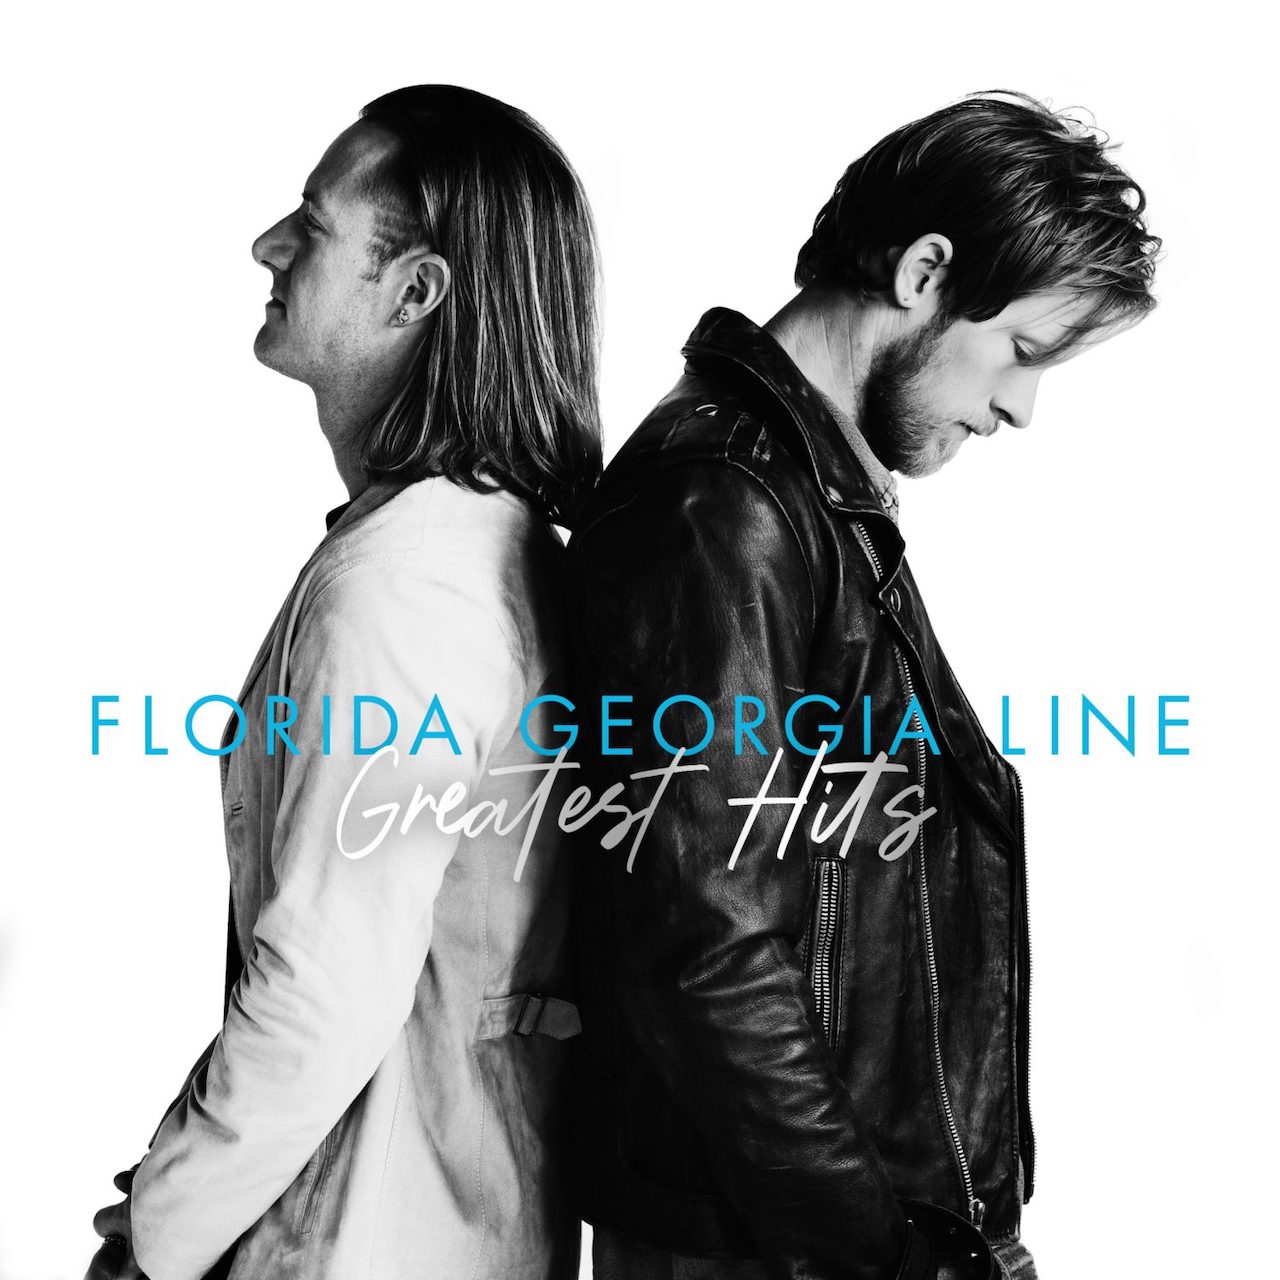 Florida Georgia Line Bow Out With 'Greatest Hits', Previewed By 'Life